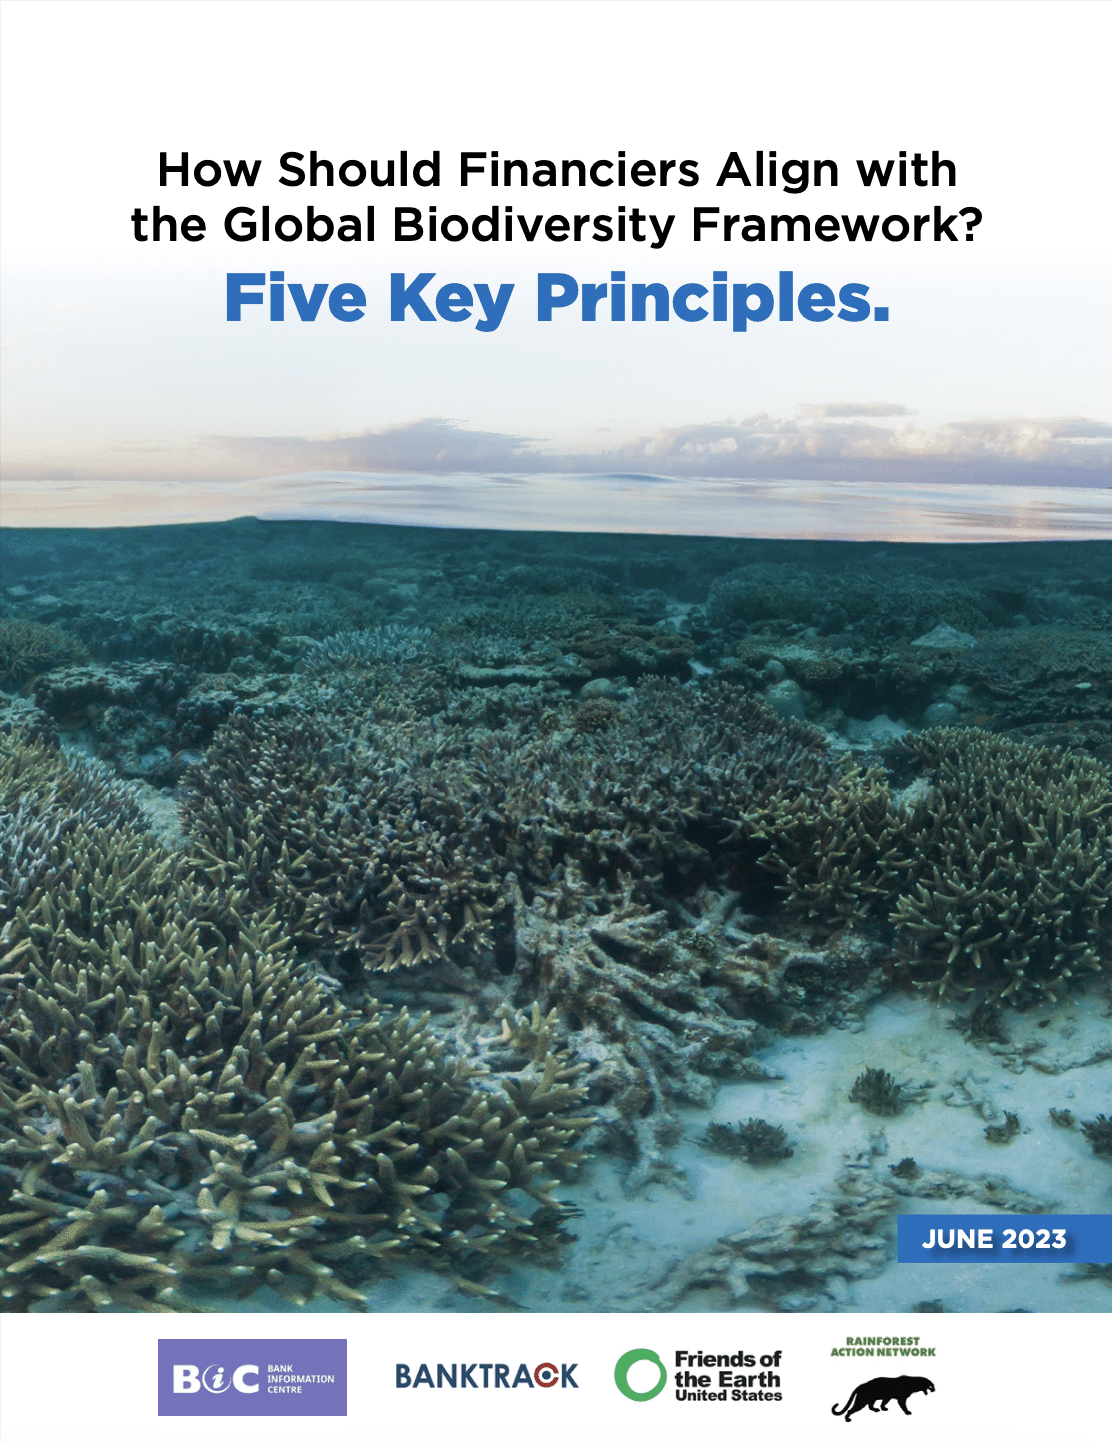 How Should Financiers Align with the Global Biodiversity Framework?